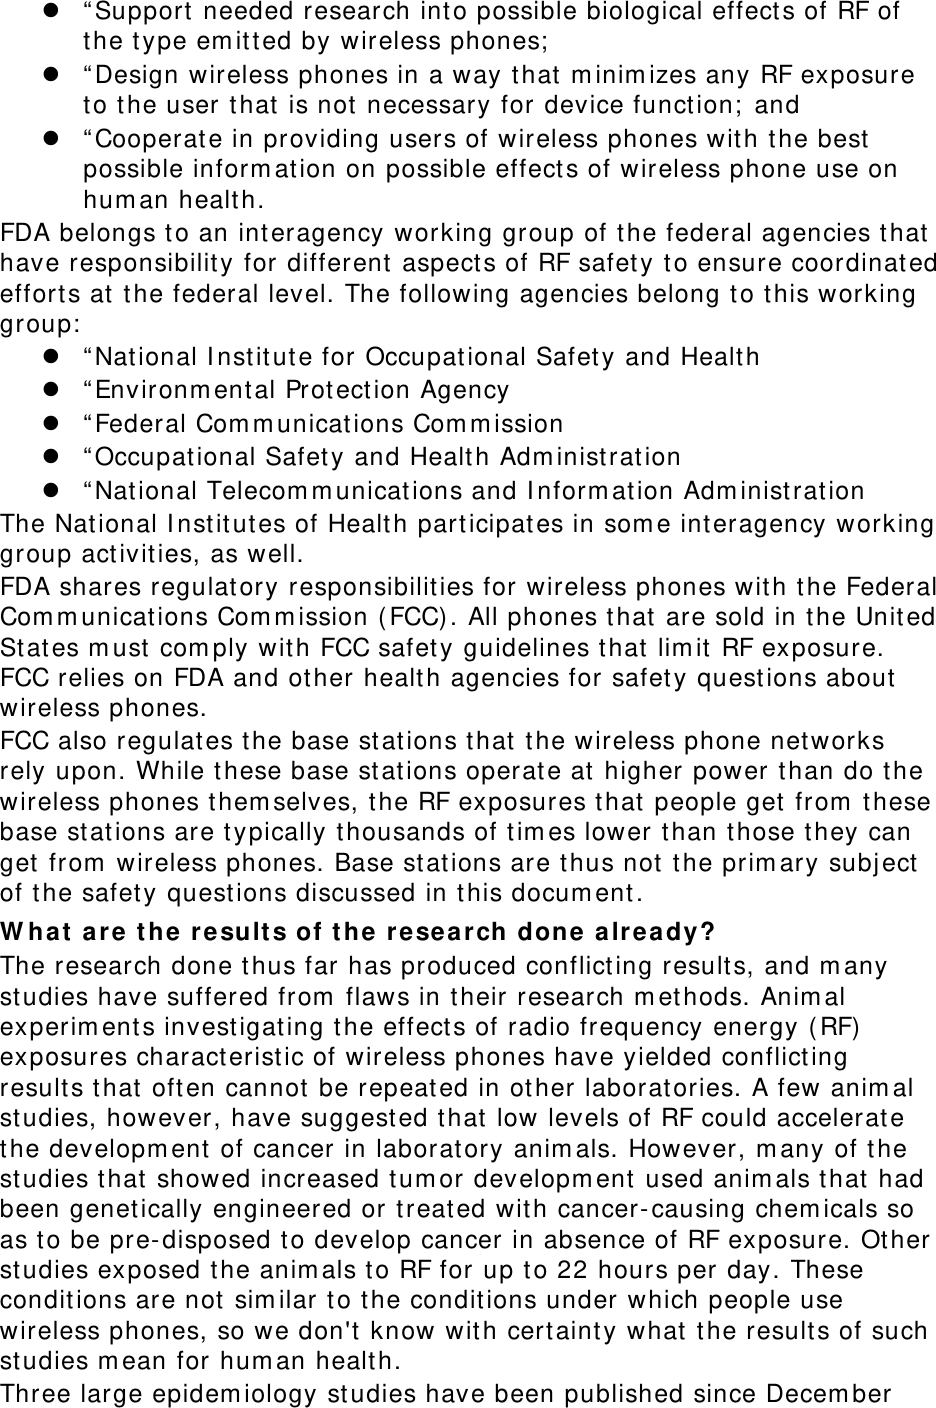  “Support needed research into possible biological effects of RF of the type emitted by wireless phones;  “Design wireless phones in a way that minimizes any RF exposure to the user that is not necessary for device function; and  “Cooperate in providing users of wireless phones with the best possible information on possible effects of wireless phone use on human health. FDA belongs to an interagency working group of the federal agencies that have responsibility for different aspects of RF safety to ensure coordinated efforts at the federal level. The following agencies belong to this working group:  “National Institute for Occupational Safety and Health  “Environmental Protection Agency  “Federal Communications Commission  “Occupational Safety and Health Administration  “National Telecommunications and Information Administration The National Institutes of Health participates in some interagency working group activities, as well. FDA shares regulatory responsibilities for wireless phones with the Federal Communications Commission (FCC). All phones that are sold in the United States must comply with FCC safety guidelines that limit RF exposure. FCC relies on FDA and other health agencies for safety questions about wireless phones. FCC also regulates the base stations that the wireless phone networks rely upon. While these base stations operate at higher power than do the wireless phones themselves, the RF exposures that people get from these base stations are typically thousands of times lower than those they can get from wireless phones. Base stations are thus not the primary subject of the safety questions discussed in this document. What are the results of the research done already? The research done thus far has produced conflicting results, and many studies have suffered from flaws in their research methods. Animal experiments investigating the effects of radio frequency energy (RF) exposures characteristic of wireless phones have yielded conflicting results that often cannot be repeated in other laboratories. A few animal studies, however, have suggested that low levels of RF could accelerate the development of cancer in laboratory animals. However, many of the studies that showed increased tumor development used animals that had been genetically engineered or treated with cancer-causing chemicals so as to be pre-disposed to develop cancer in absence of RF exposure. Other studies exposed the animals to RF for up to 22 hours per day. These conditions are not similar to the conditions under which people use wireless phones, so we don&apos;t know with certainty what the results of such studies mean for human health. Three large epidemiology studies have been published since December 